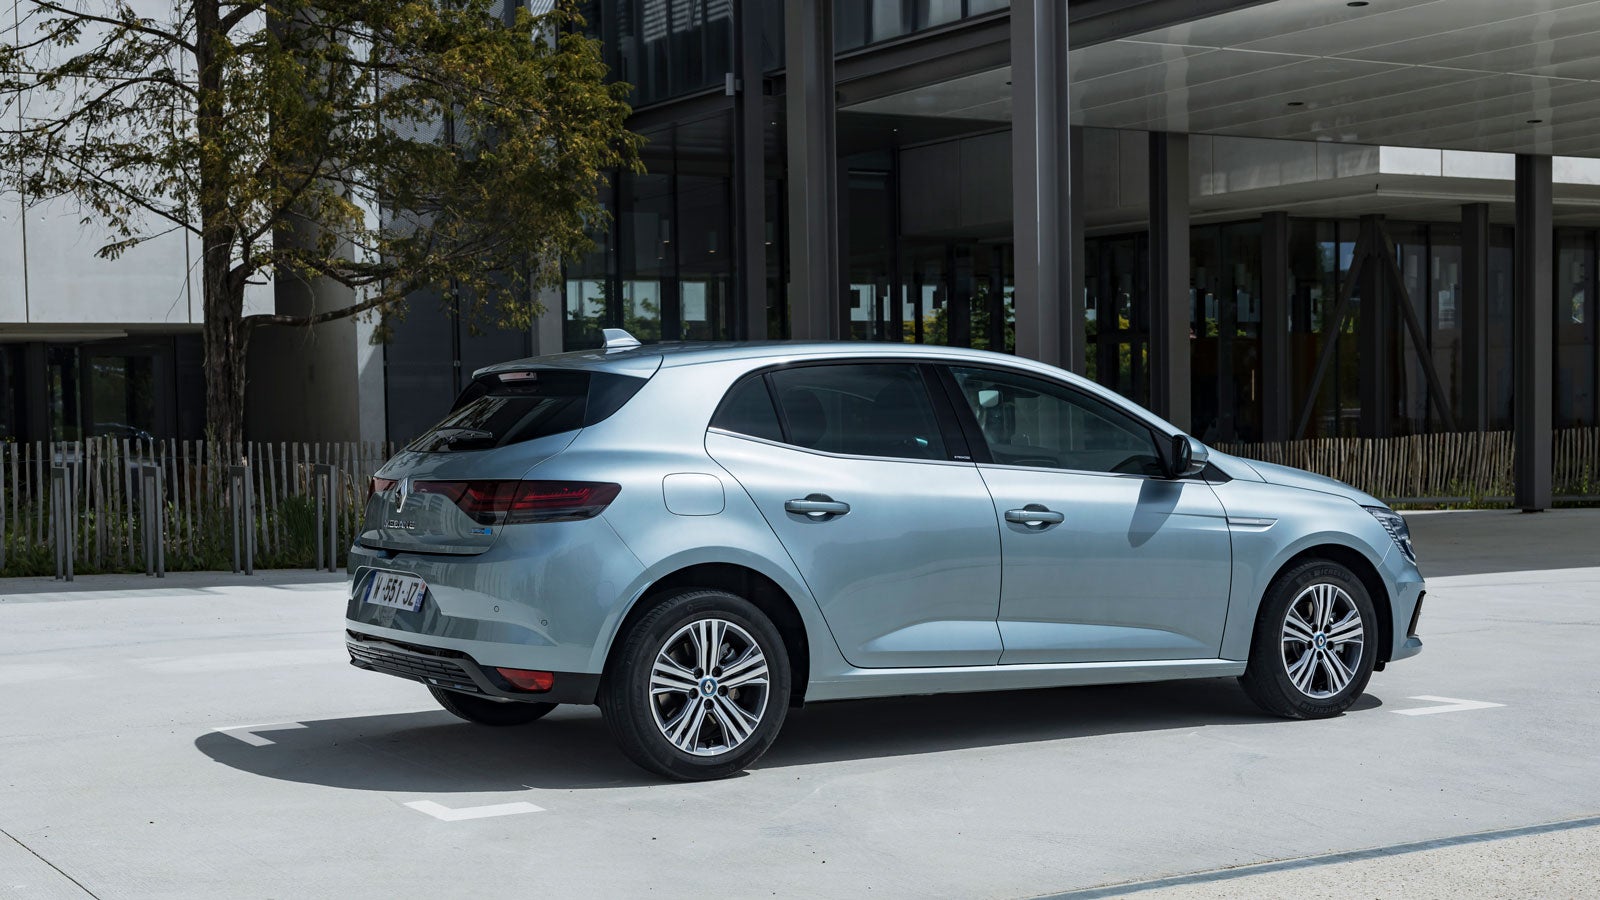 Consumers May Have Been Misled on Plug-In Hybrid Efficiency